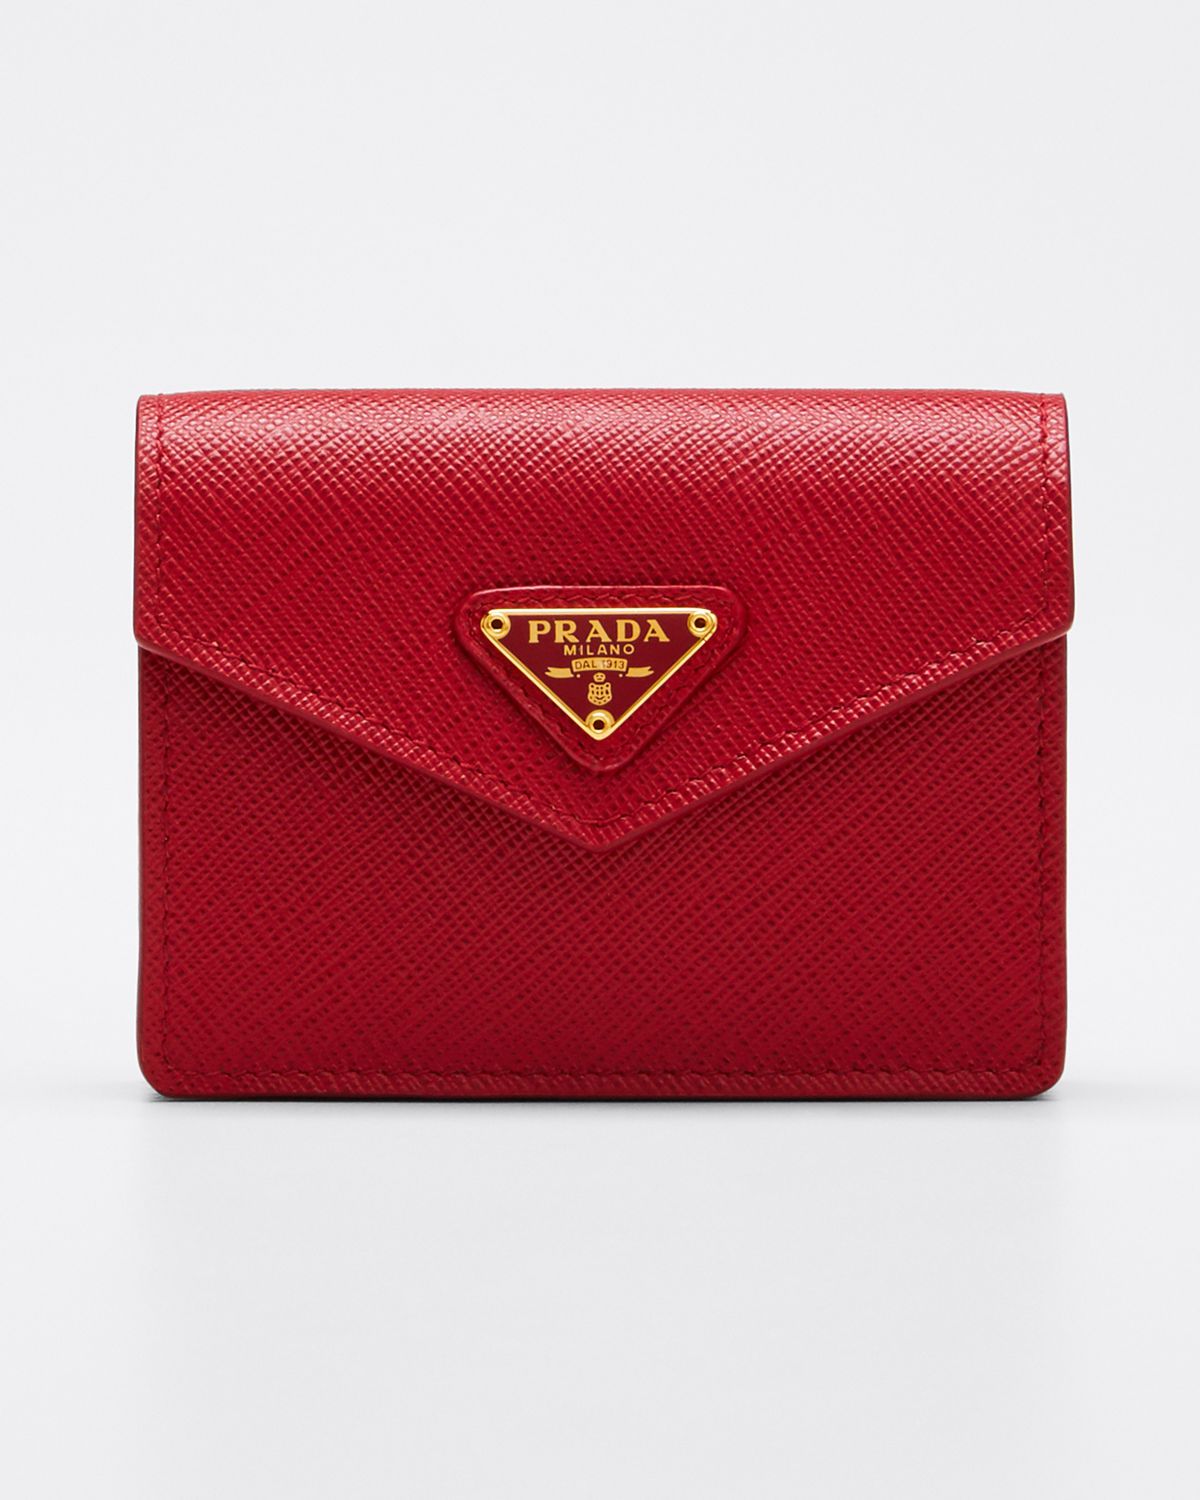 Accessorize with Flair: Designer Wallets for Every Style